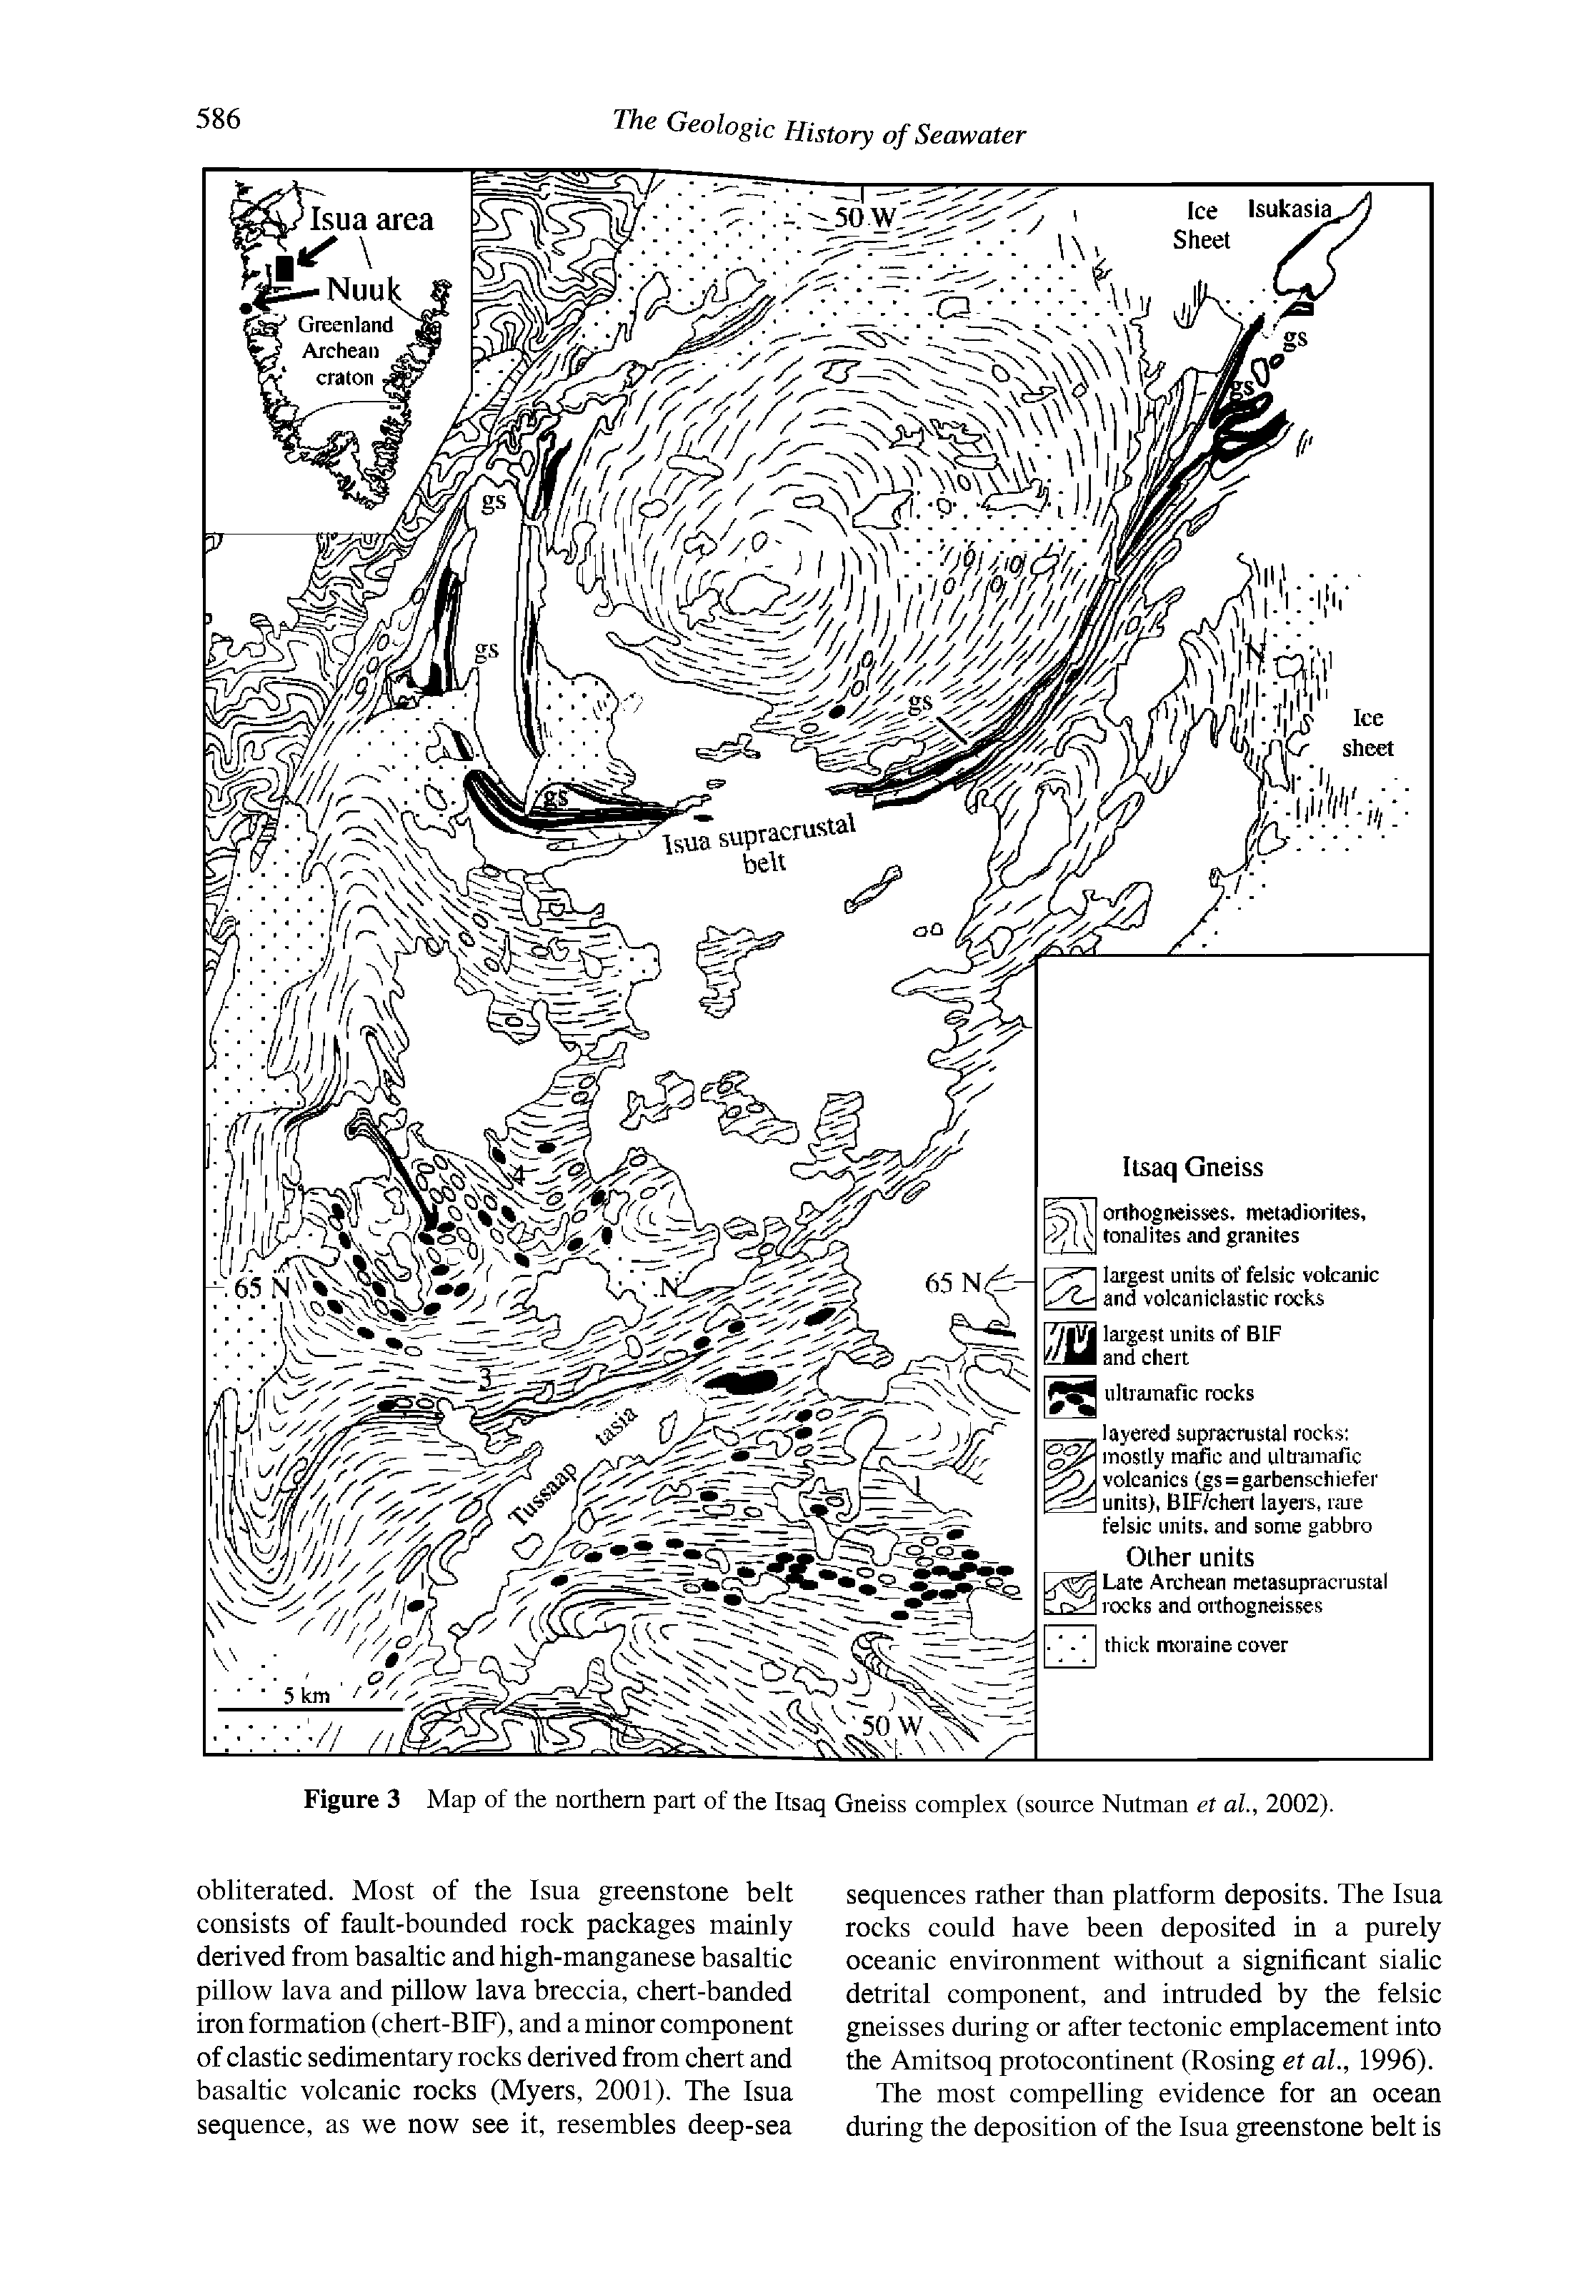 Figure 3 Map of the northern part of the Itsaq Gneiss complex (source Nutman et al, 2002).